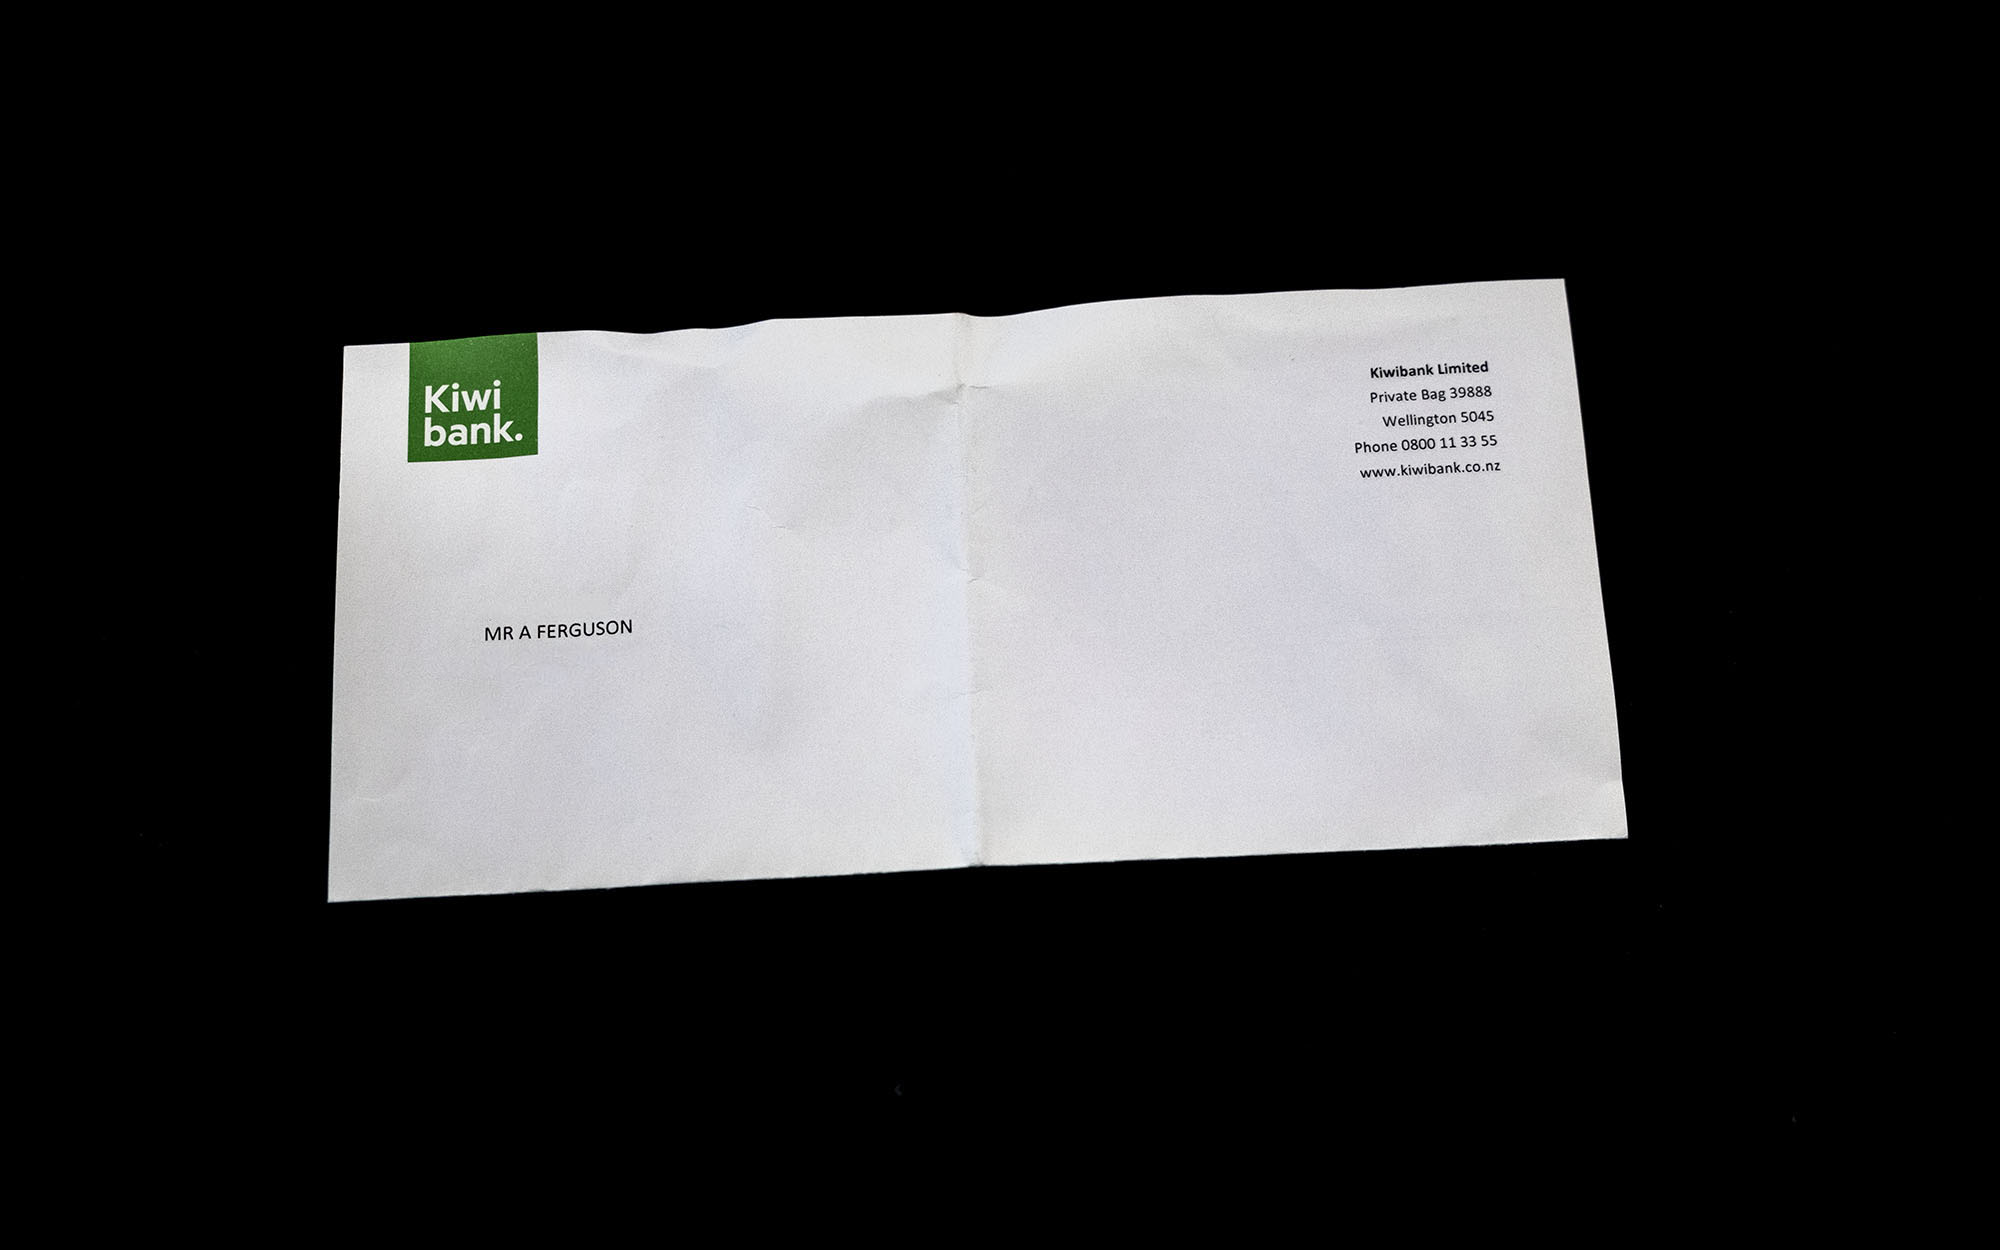 Letter from Kiwibank with their logo in the top-let corner and address in the top-right corner, and Aster's name in the bottom-left